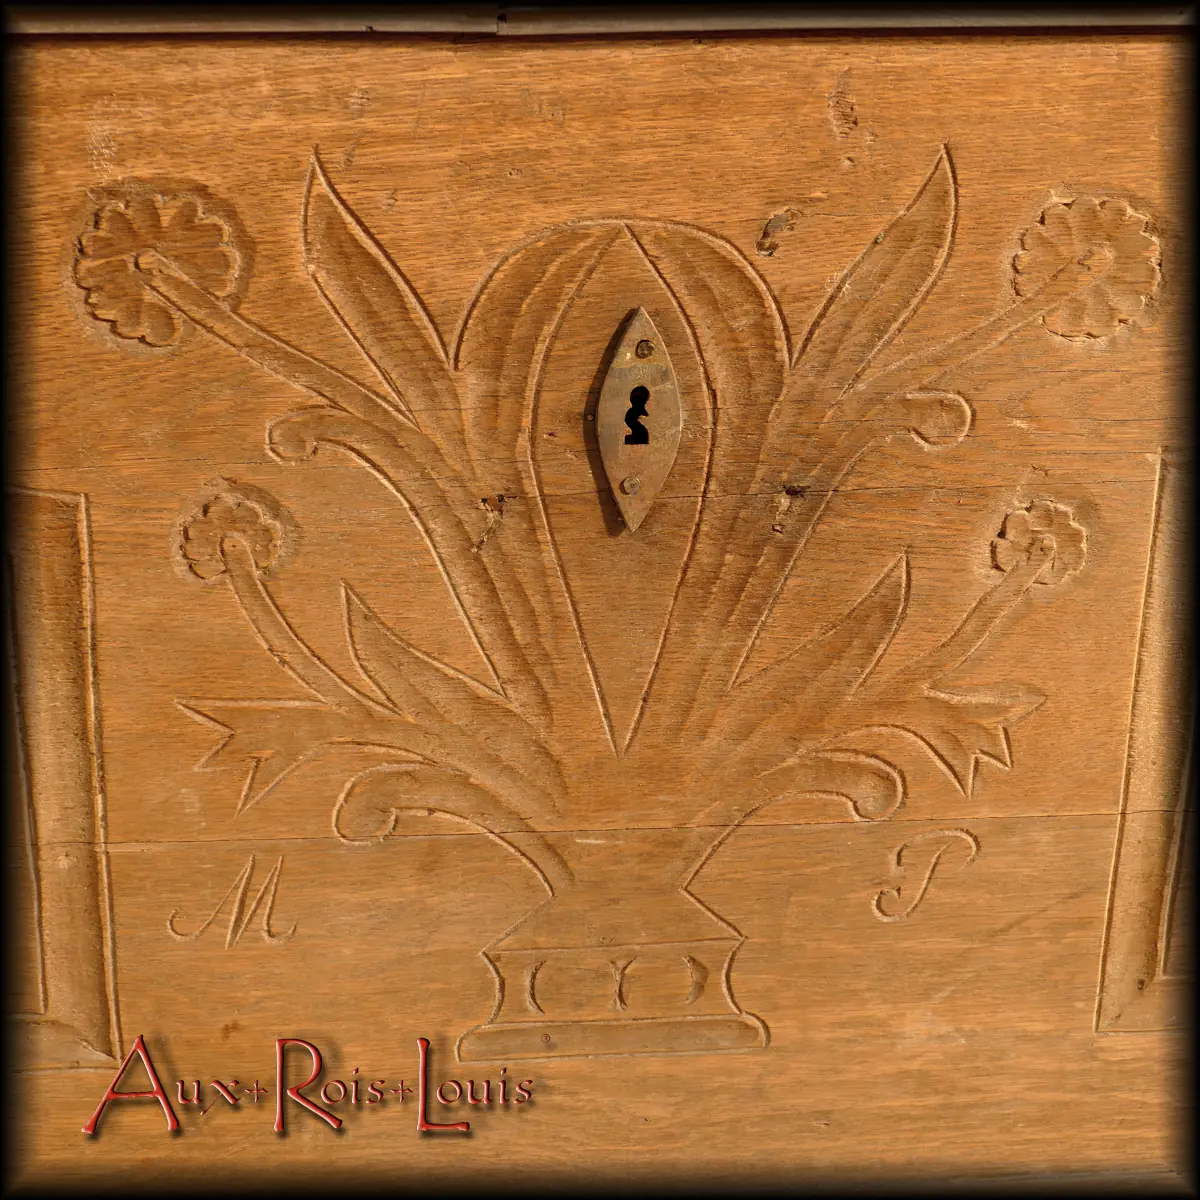 Simple and delicate, this end-of-bed chest is so even in its central motif: a carved country bouquet around the keyhole, and on either side of the vase, two initials, M and P. Likely the initials of the two fiancés for whom this end-of-bed chest was commissioned in Aquitaine in the 18th century, on the eve of their wedding celebration.